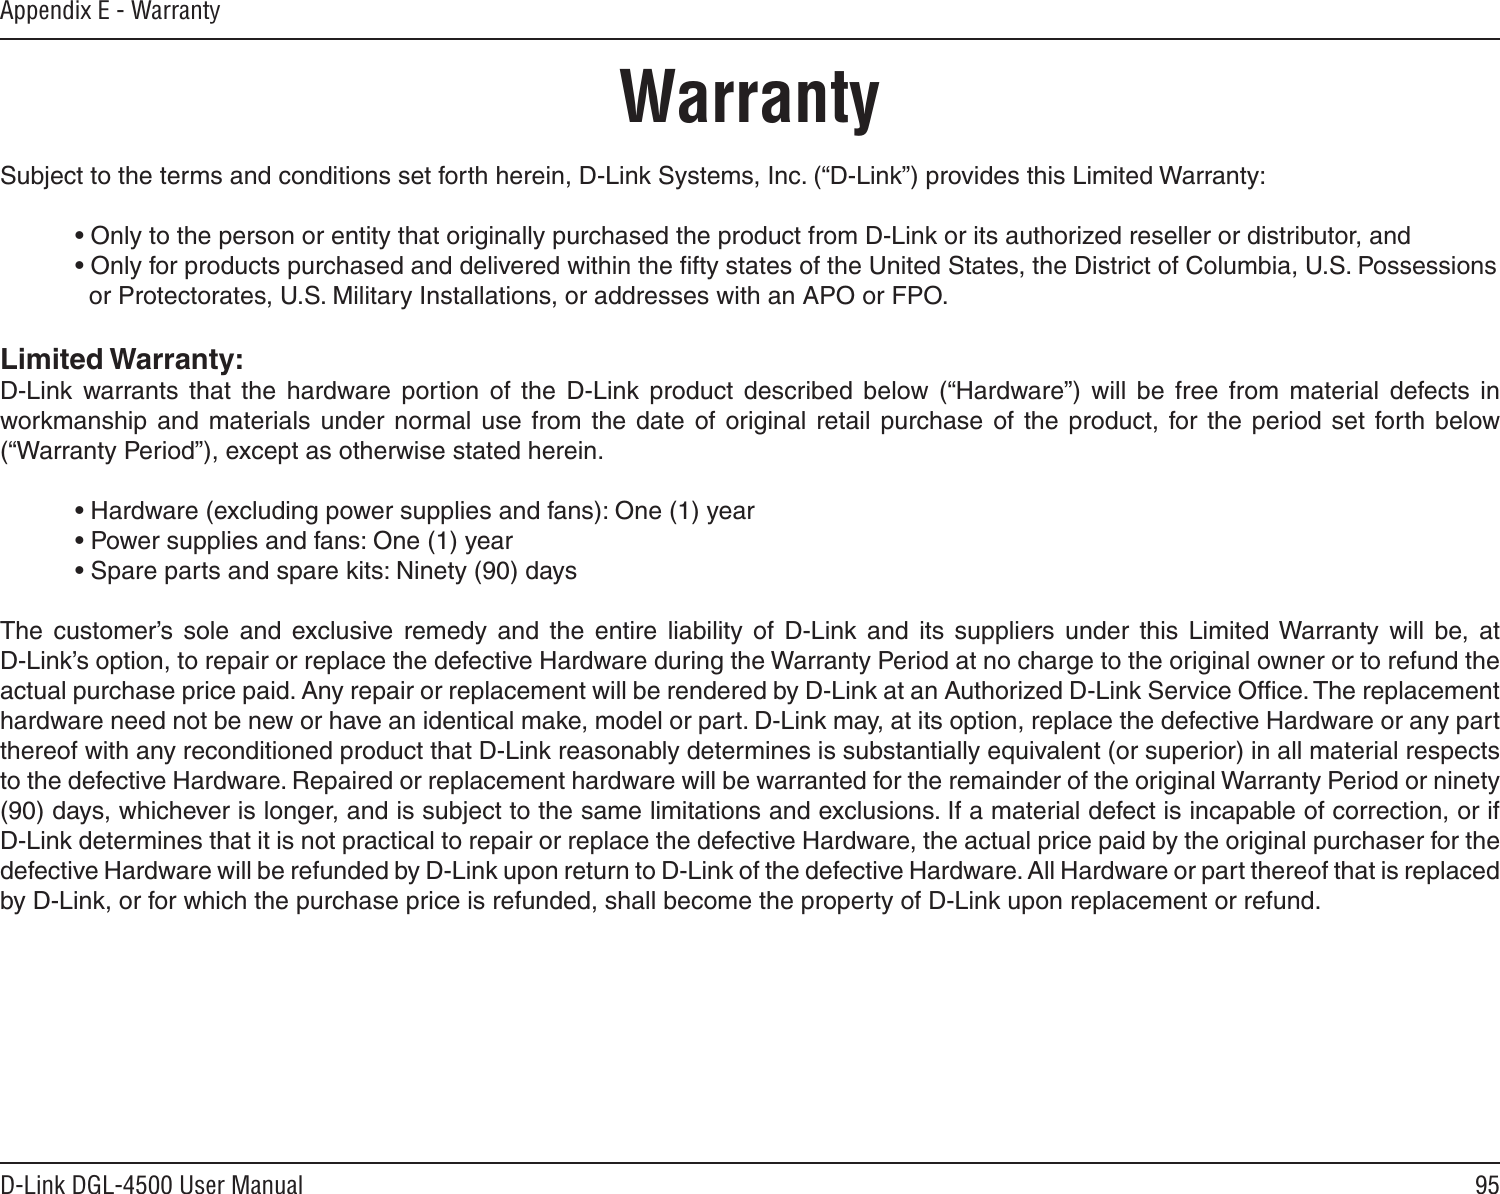 95D-Link DGL-4500 User ManualAppendix E - WarrantyWarrantySubject to the terms and conditions set forth herein, D-Link Systems, Inc. (“D-Link”) provides this Limited Warranty:  • Only to the person or entity that originally purchased the product from D-Link or its authorized reseller or distributor, and  • Only for products purchased and delivered within the ﬁfty states of the United States, the District of Columbia, U.S. Possessions      or Protectorates, U.S. Military Installations, or addresses with an APO or FPO.Limited Warranty:D-Link  warrants  that  the  hardware  portion  of  the  D-Link  product  described  below  (“Hardware”)  will  be  free  from  material  defects  in workmanship  and  materials  under  normal  use  from  the date  of  original  retail purchase  of  the product, for the period  set forth  below (“Warranty Period”), except as otherwise stated herein.  • Hardware (excluding power supplies and fans): One (1) year  • Power supplies and fans: One (1) year  • Spare parts and spare kits: Ninety (90) daysThe  customer’s  sole  and  exclusive  remedy  and  the  entire  liability  of  D-Link  and  its  suppliers  under  this  Limited Warranty  will  be,  at  D-Link’s option, to repair or replace the defective Hardware during the Warranty Period at no charge to the original owner or to refund the actual purchase price paid. Any repair or replacement will be rendered by D-Link at an Authorized D-Link Service Ofﬁce. The replacement hardware need not be new or have an identical make, model or part. D-Link may, at its option, replace the defective Hardware or any part thereof with any reconditioned product that D-Link reasonably determines is substantially equivalent (or superior) in all material respects to the defective Hardware. Repaired or replacement hardware will be warranted for the remainder of the original Warranty Period or ninety (90) days, whichever is longer, and is subject to the same limitations and exclusions. If a material defect is incapable of correction, or if D-Link determines that it is not practical to repair or replace the defective Hardware, the actual price paid by the original purchaser for the defective Hardware will be refunded by D-Link upon return to D-Link of the defective Hardware. All Hardware or part thereof that is replaced by D-Link, or for which the purchase price is refunded, shall become the property of D-Link upon replacement or refund.